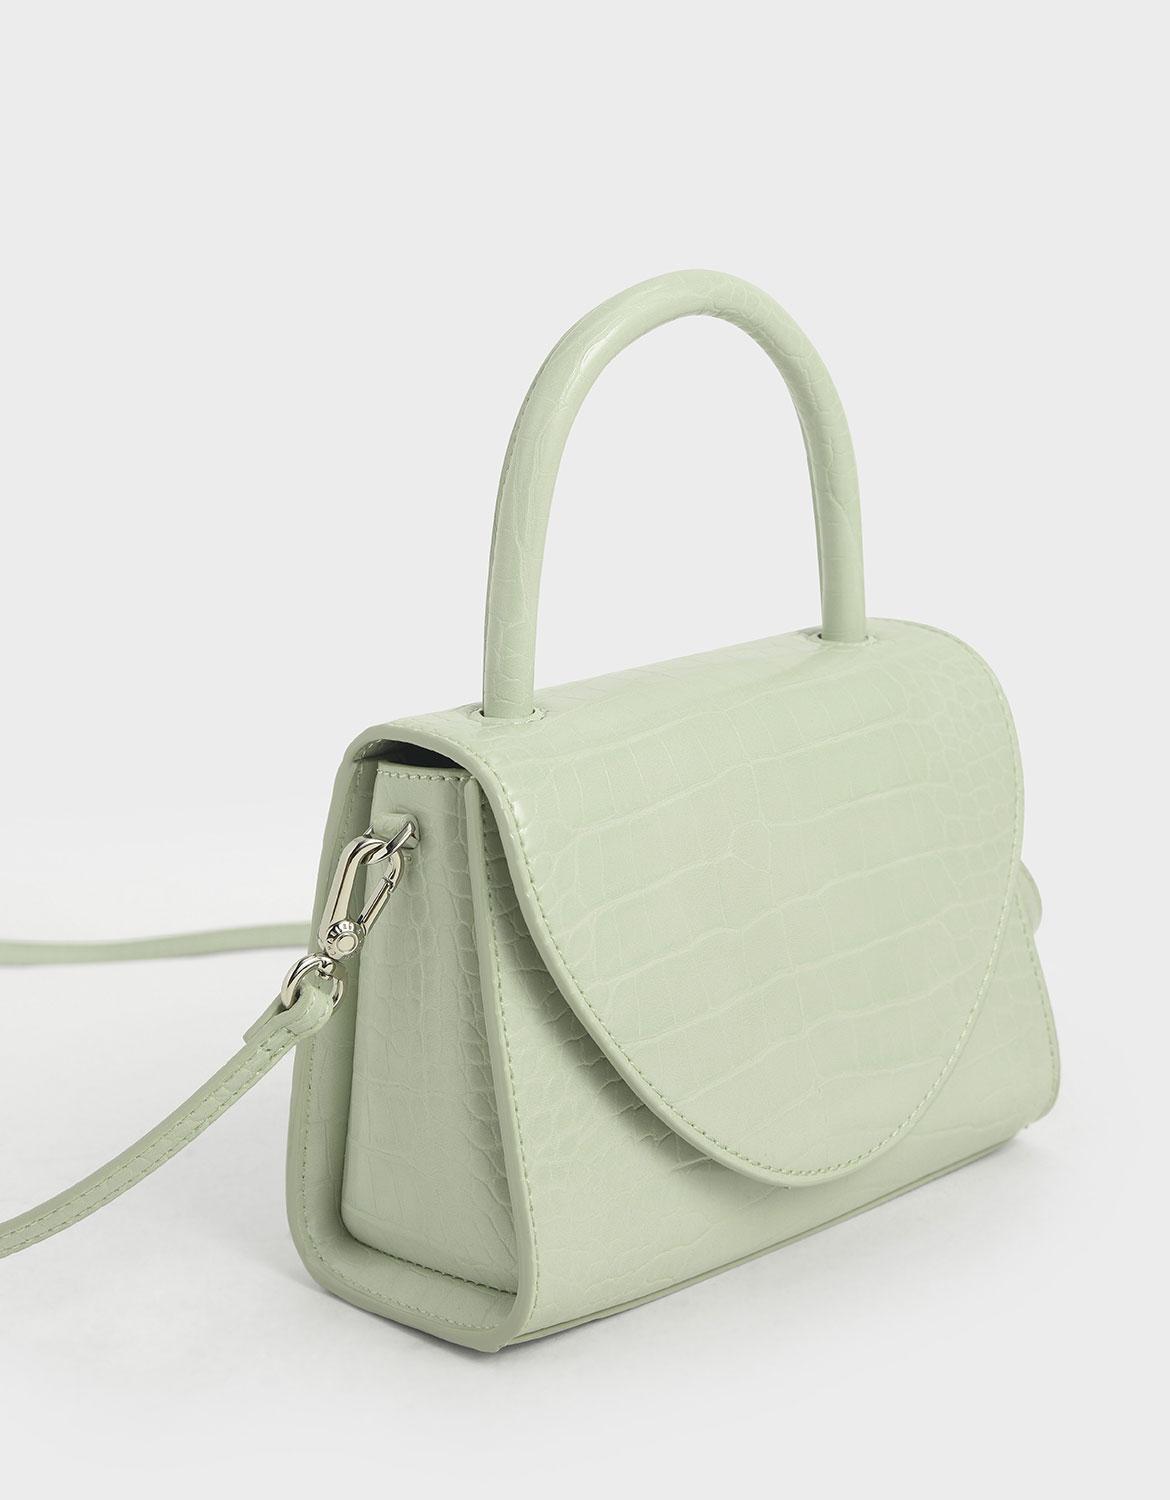 Olive Structured Top Handle Bag, CHARLES & KEITH